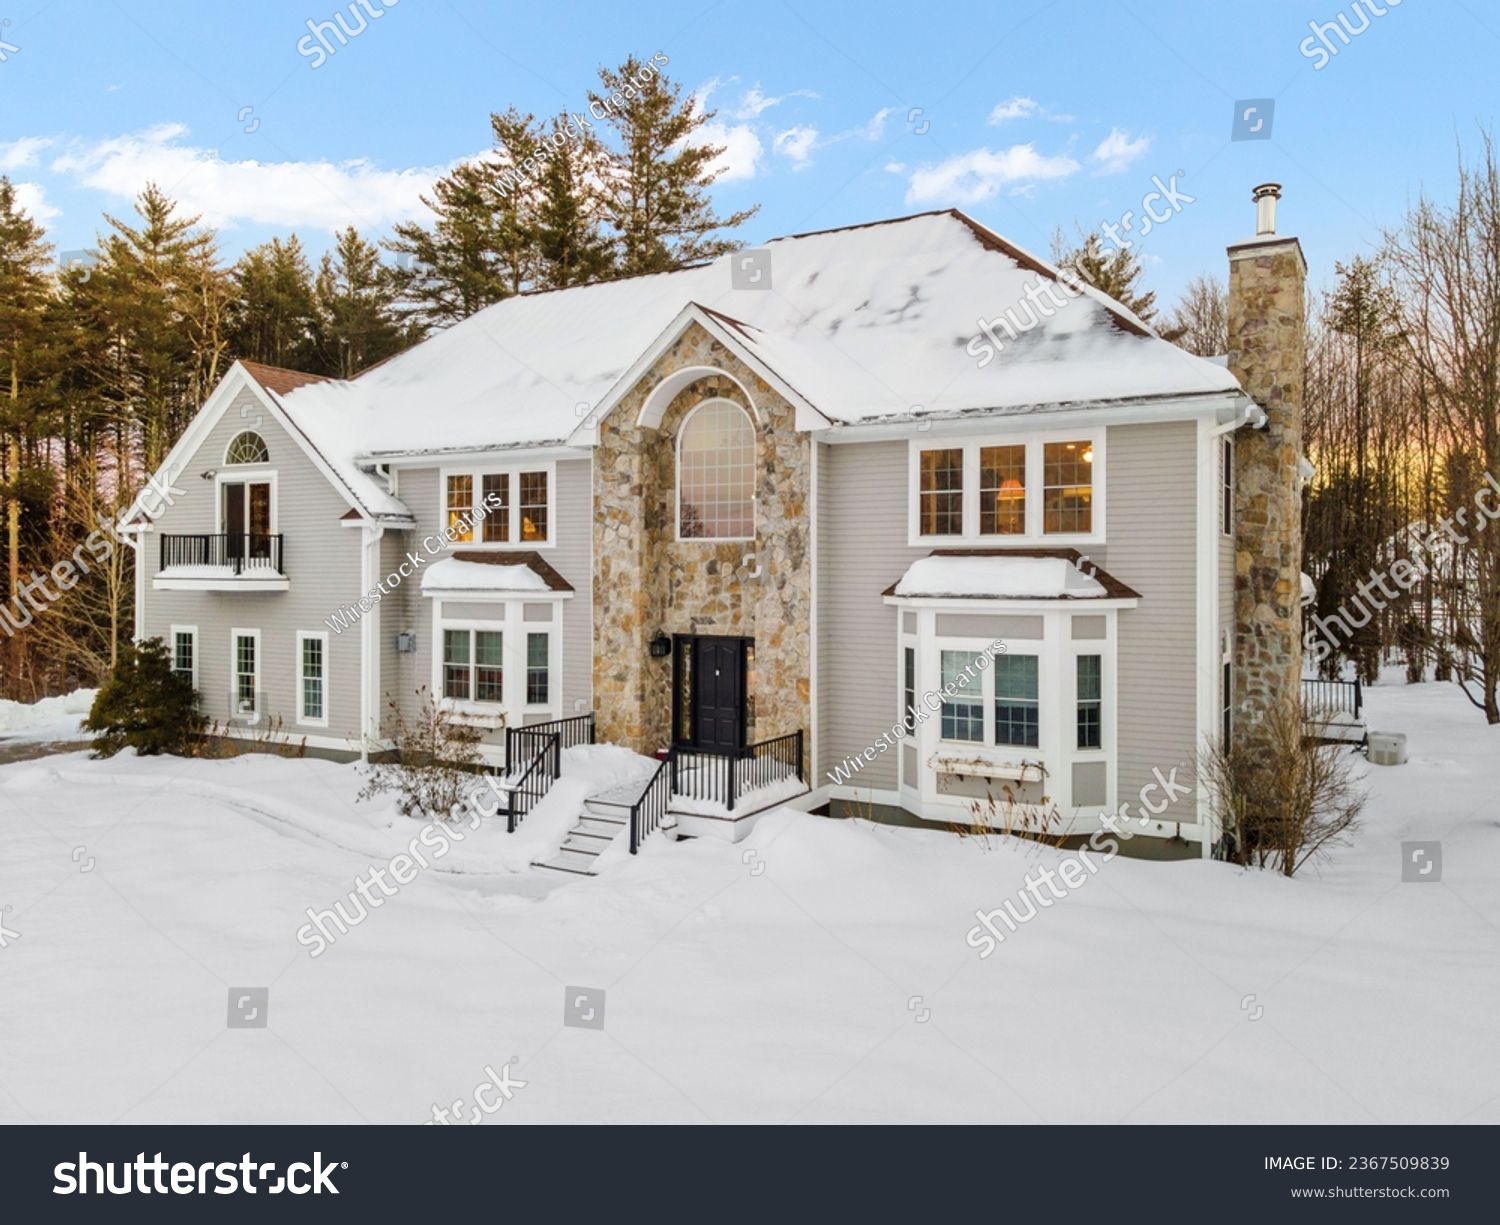 A modern two-story house on snowy winter landscapewith trees in New England #2367509839